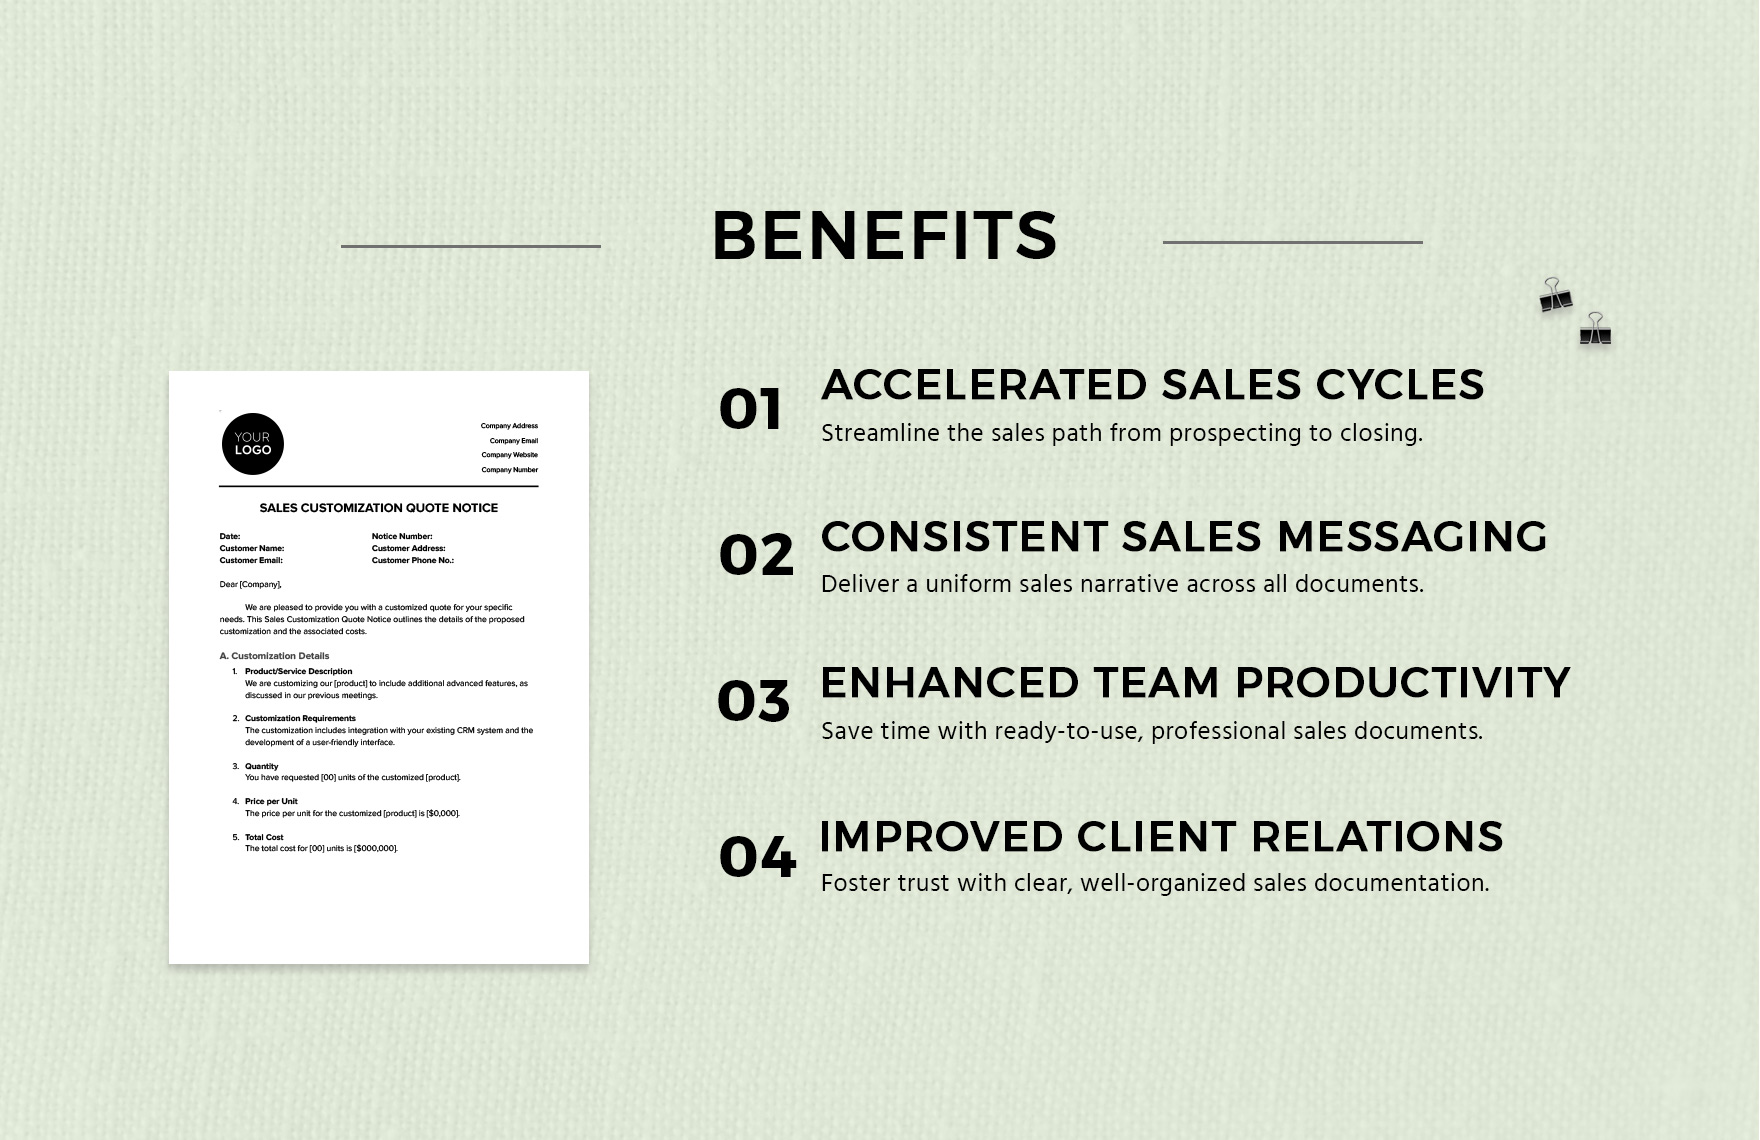 Sales Customization Quote Notice Template